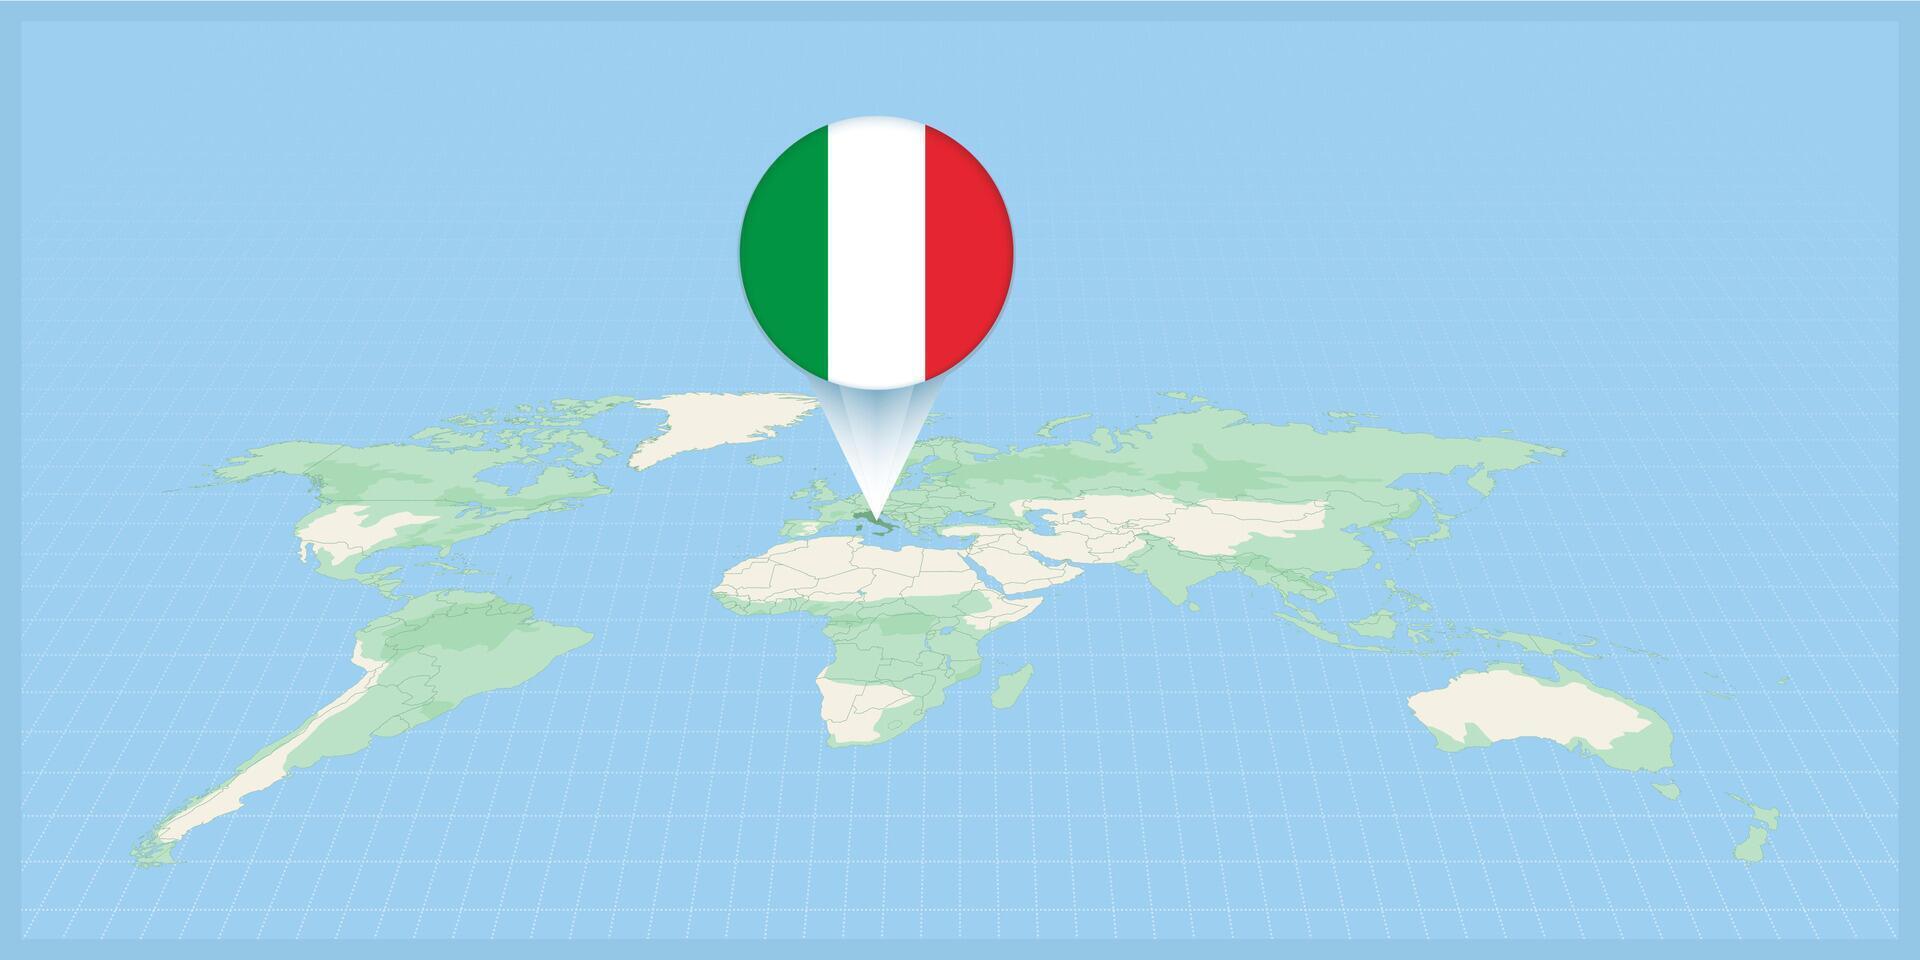 Location of Italy on the world map, marked with Italy flag pin. vector